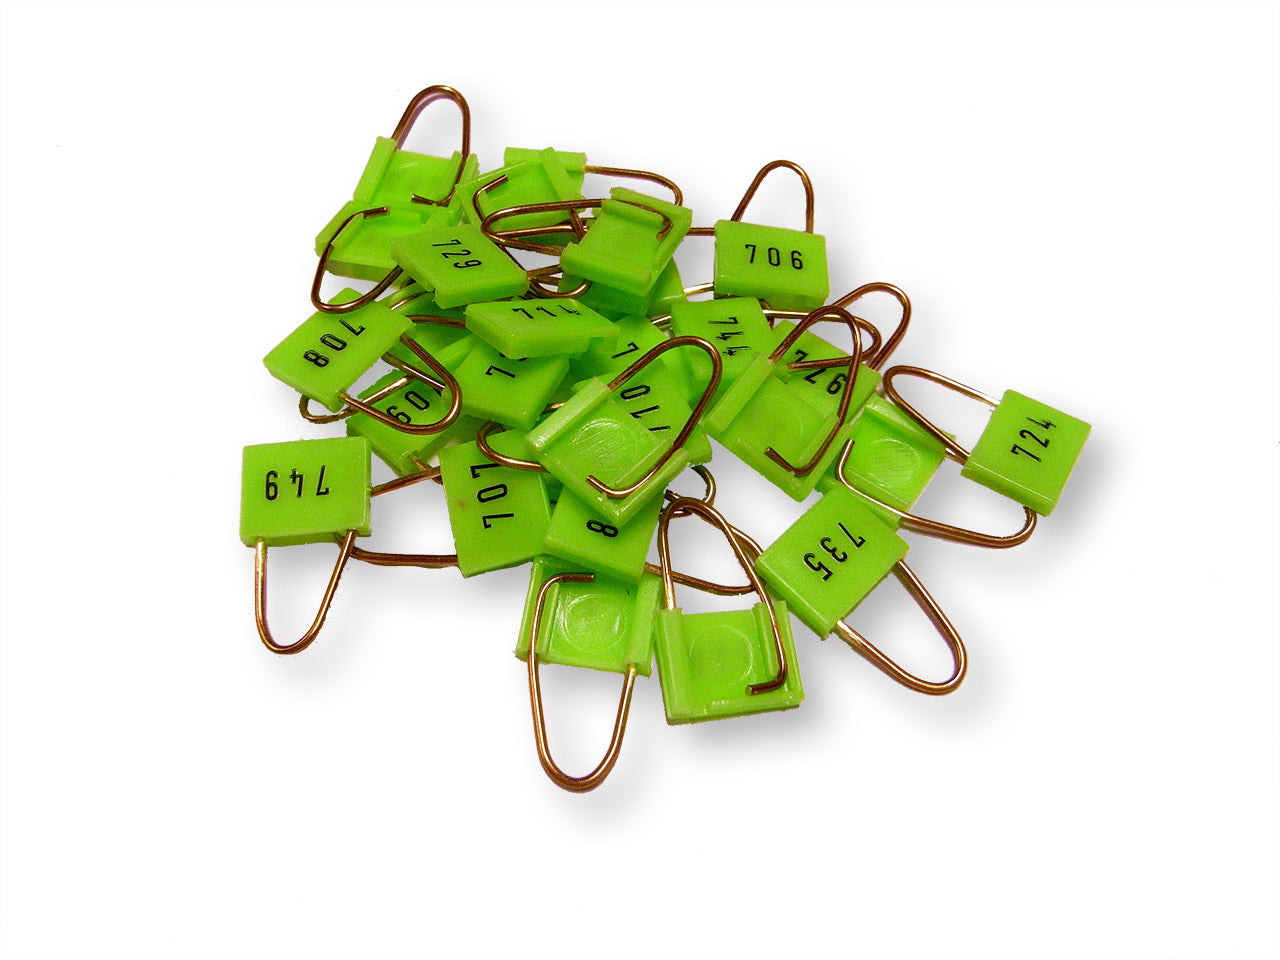 Chicks-Tags "RISTA", made of plastic, 50pc, with Numbers